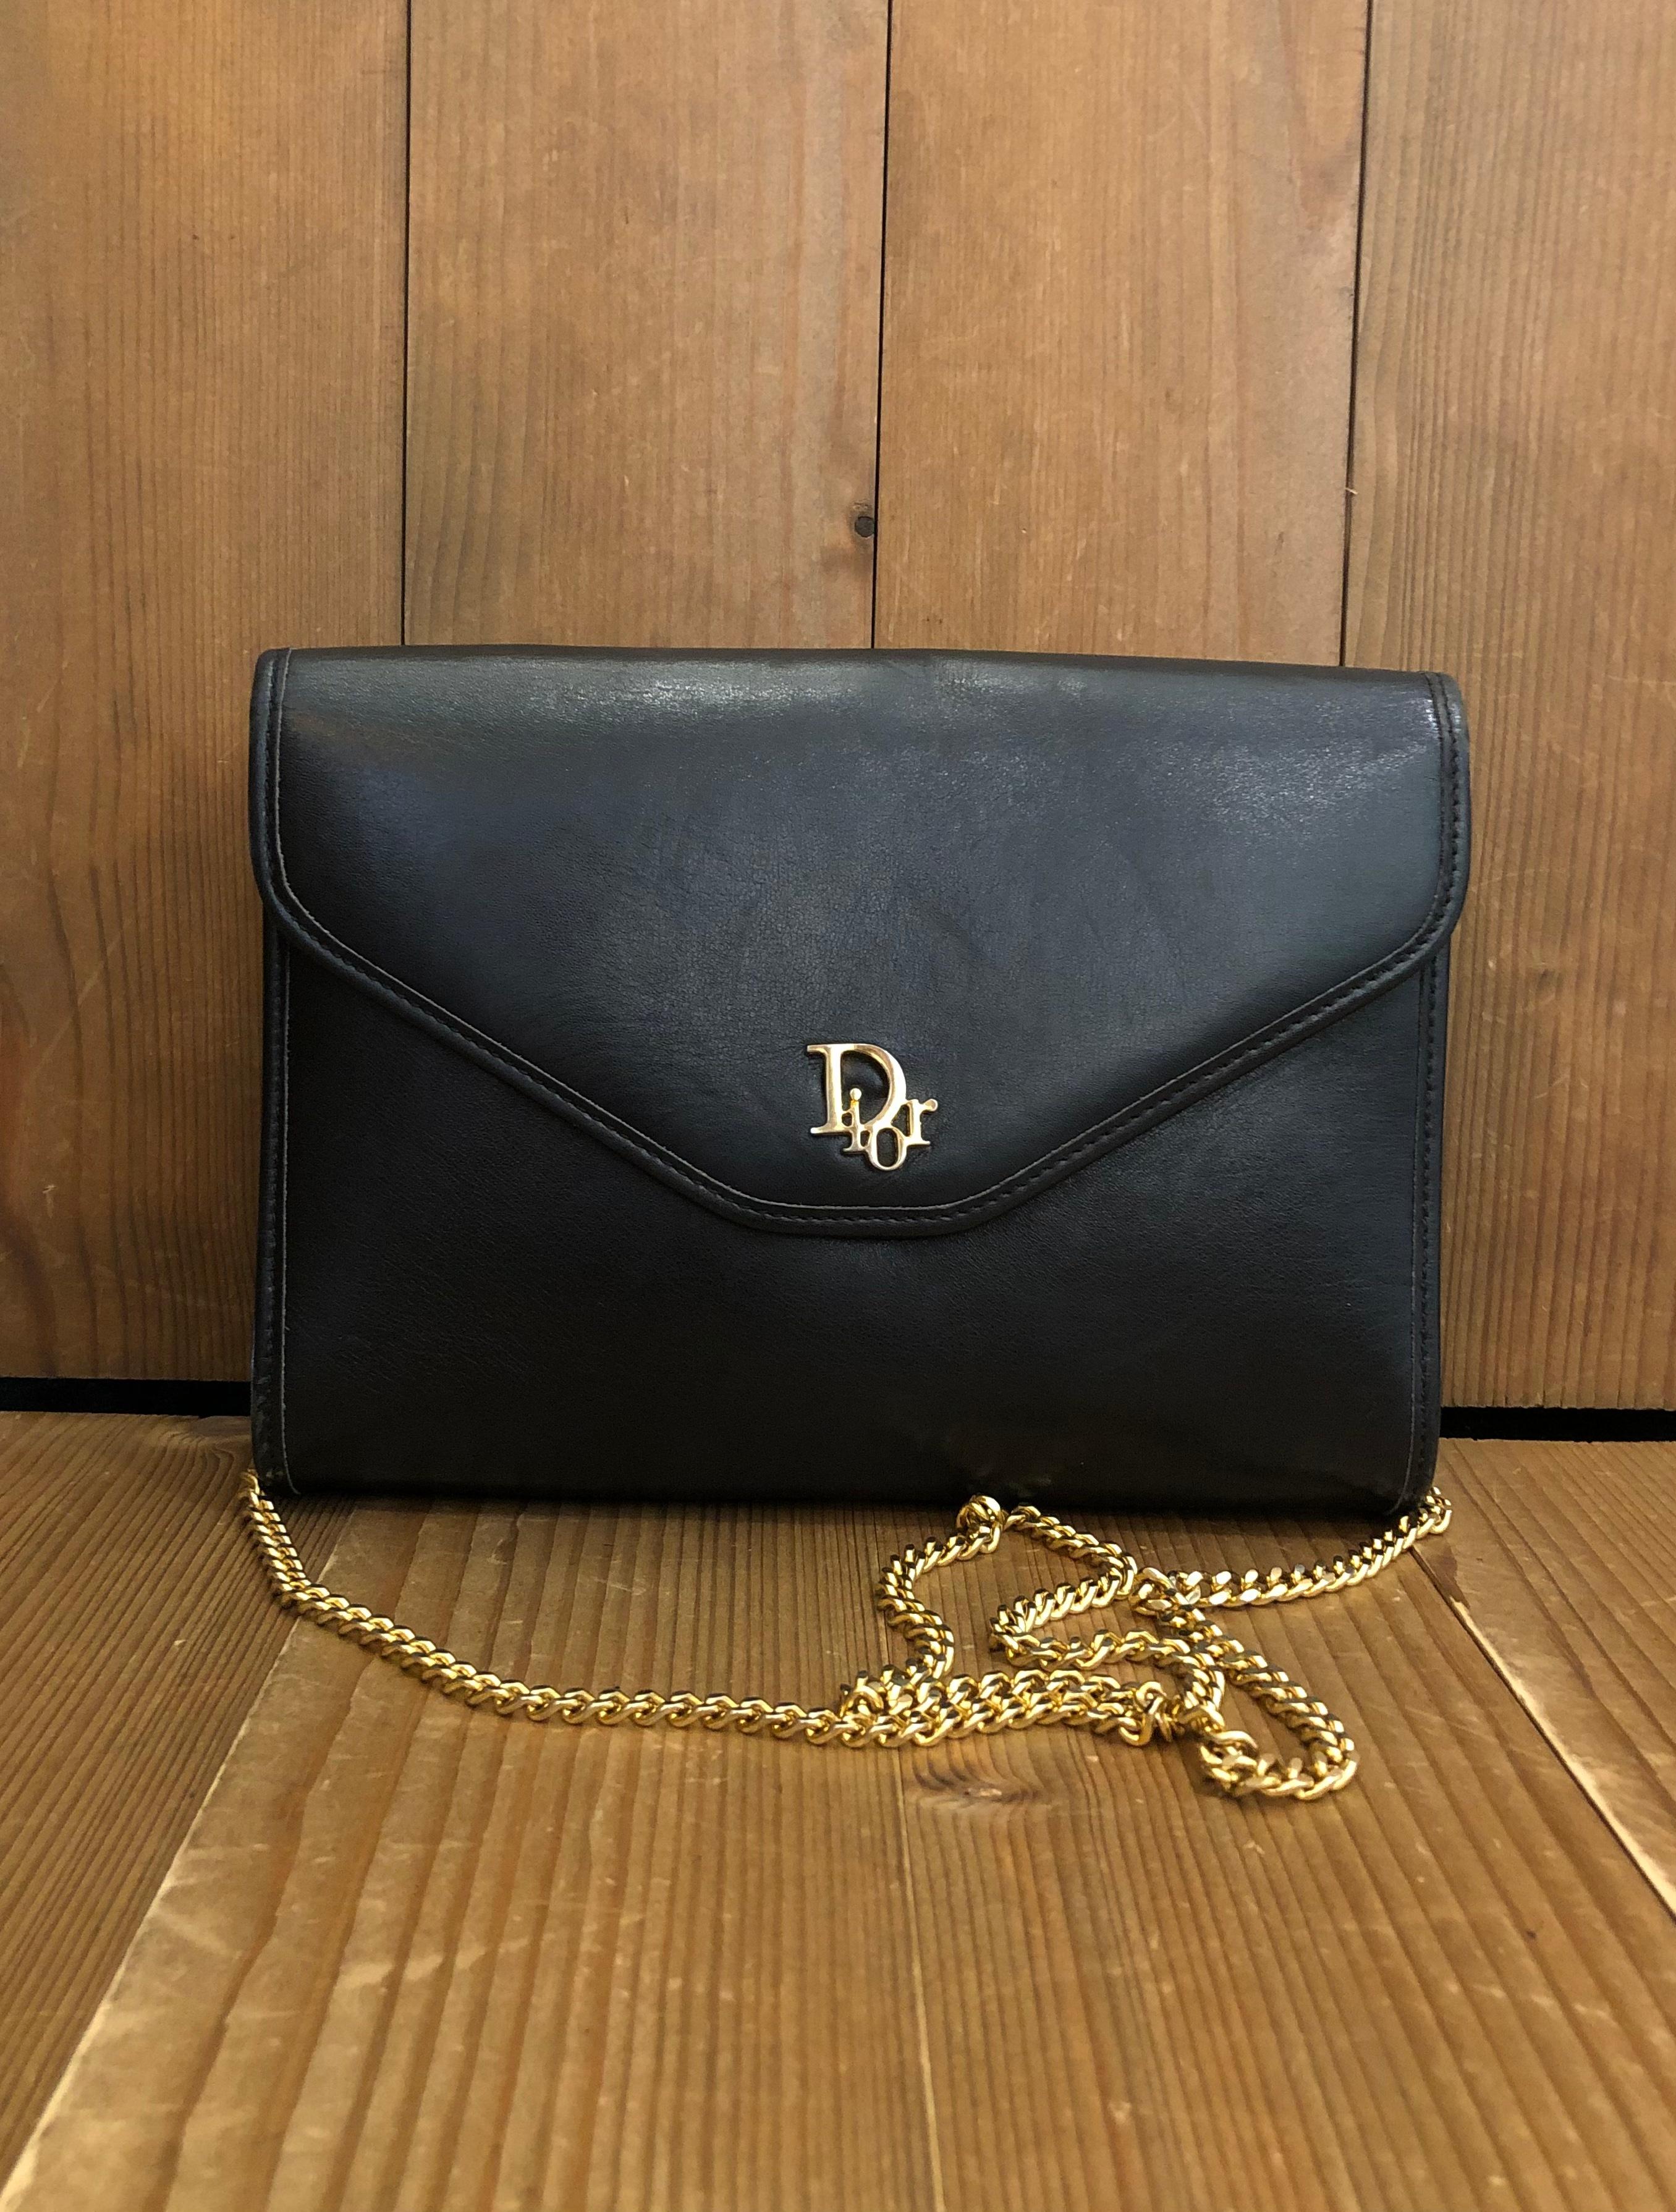 This vintage CHRISTIAN DIOR chain shoulder bag is crafted of smooth leather in black with gold toned hardware. This Dior features a gold toned chain that lets you carry it single/double chained or as a clutch. Front flap closure with snap fastening